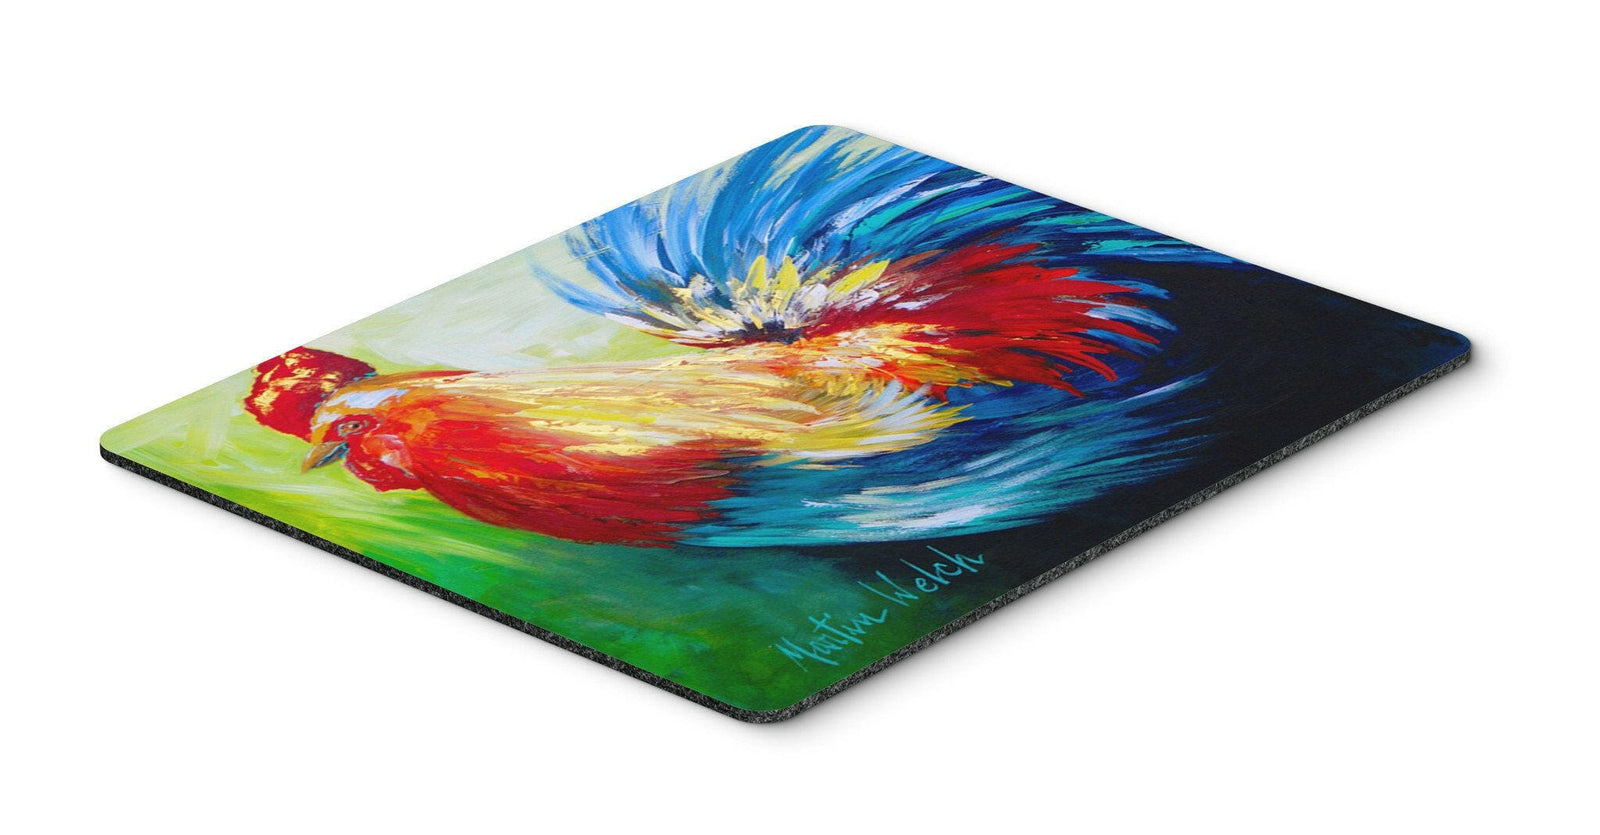 Bird - Rooster Chief Big Feathers Mouse Pad, Hot Pad or Trivet by Caroline's Treasures